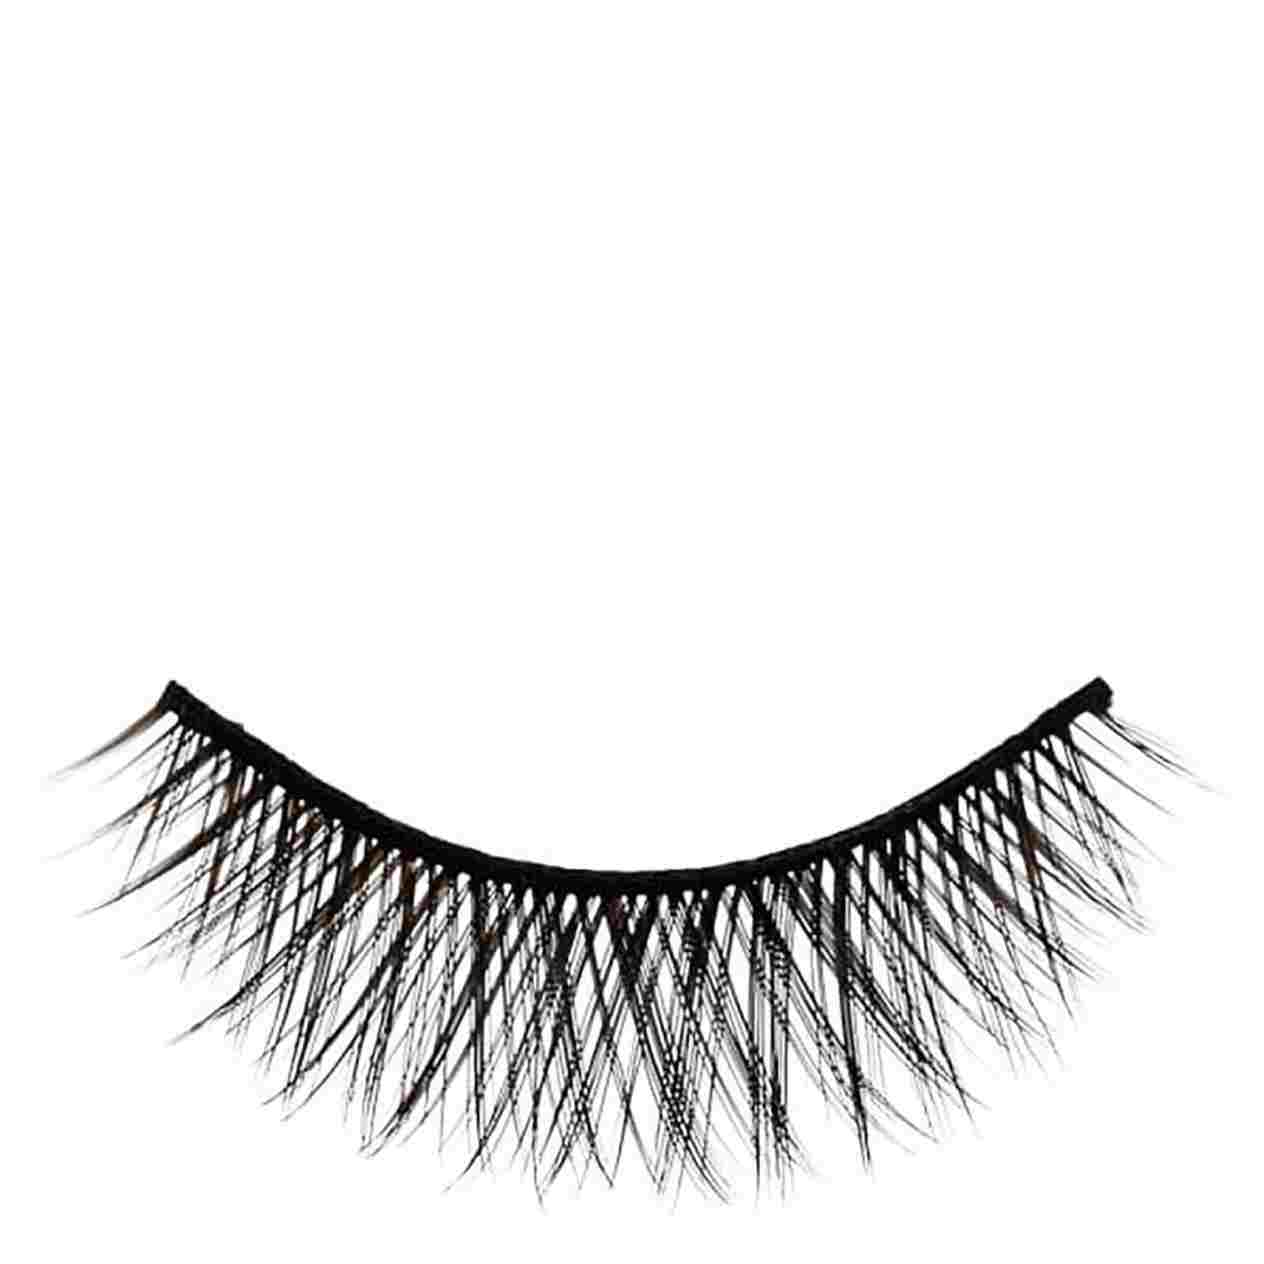 Eyebrows And Eyelashes Drawing Free download on ClipArtMag